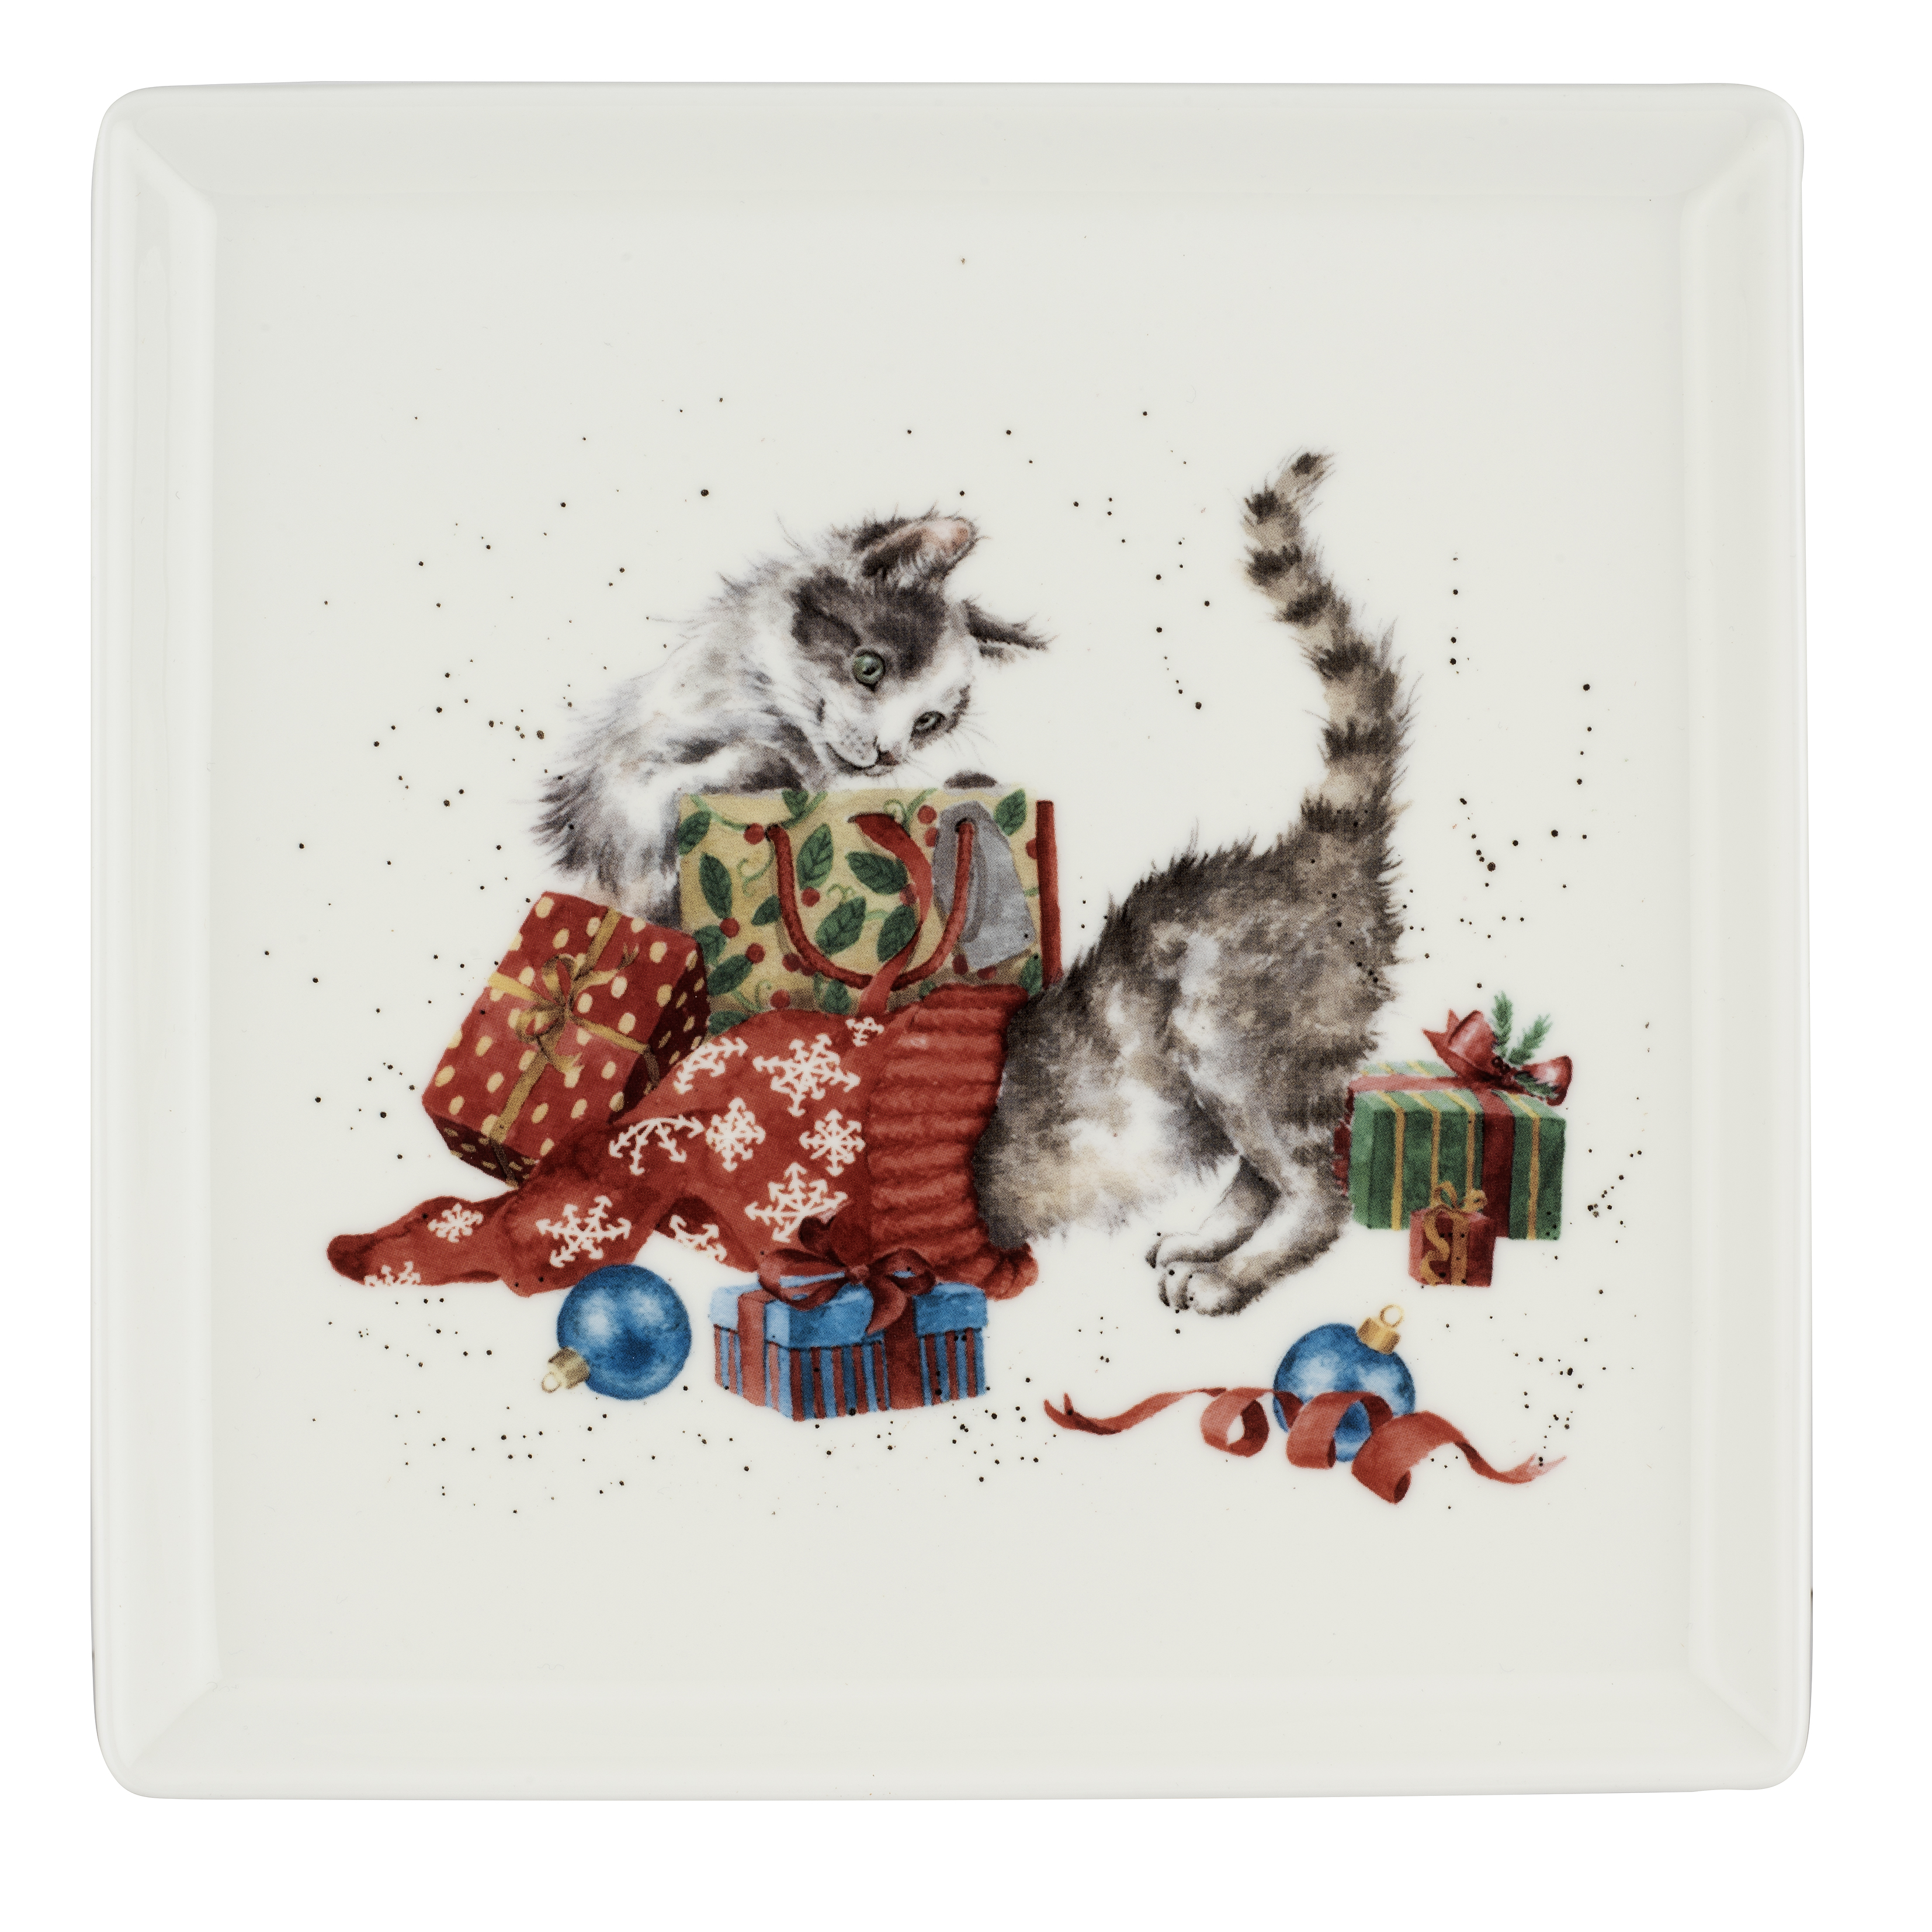 Purr-fect Gift Square 9 Inch Plate (Kitten) image number null